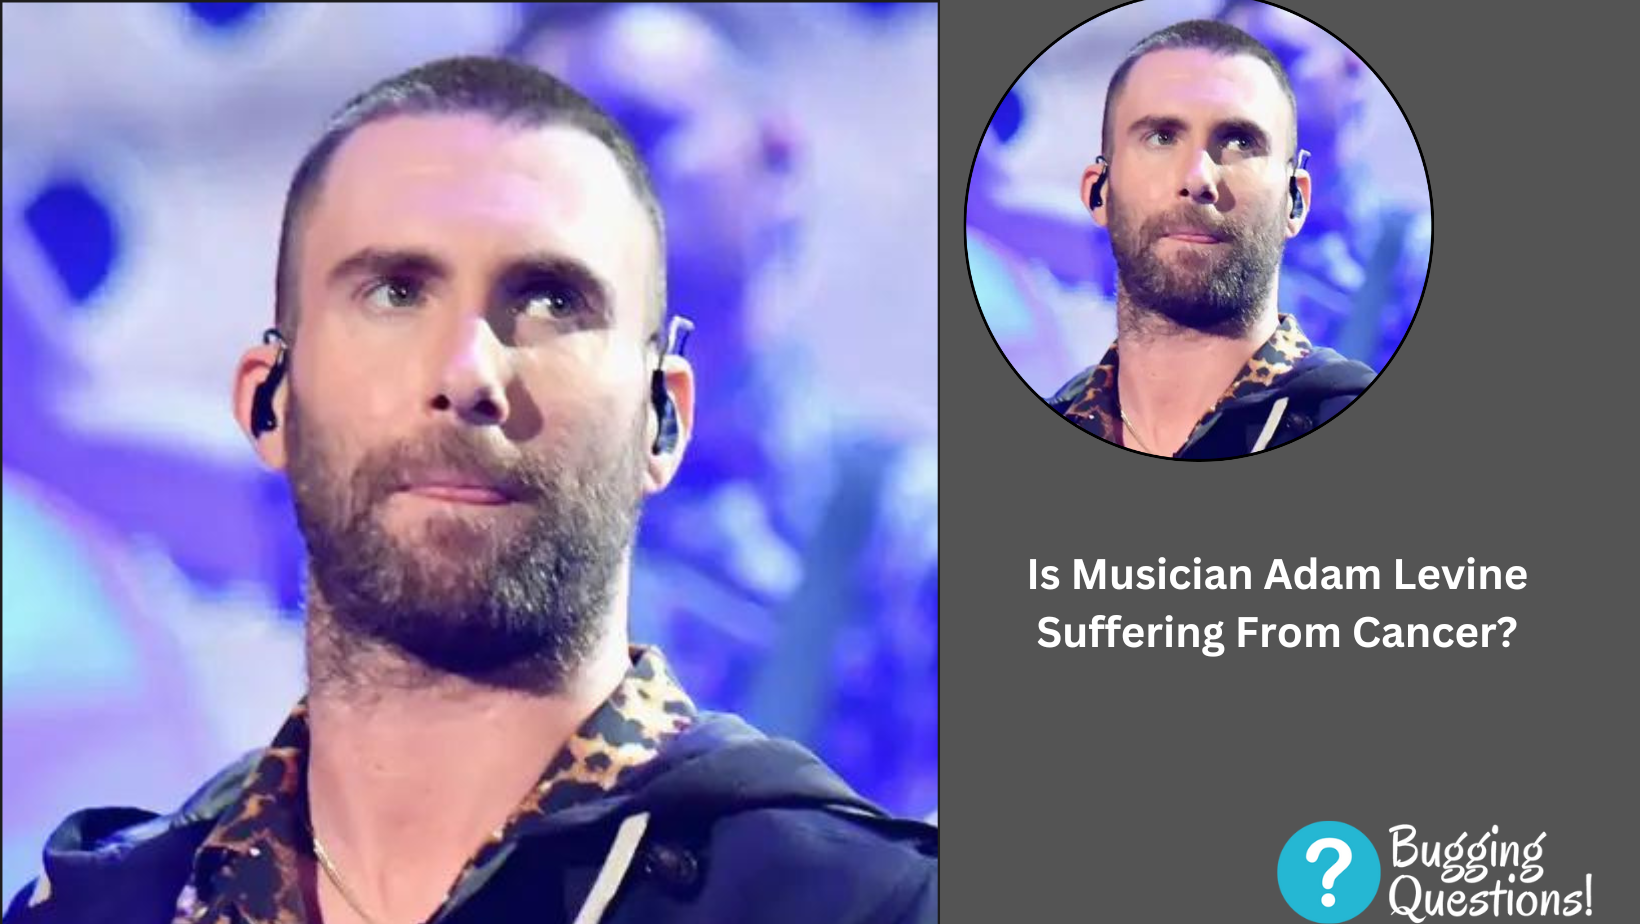 Is Musician Adam Levine Suffering From Cancer?